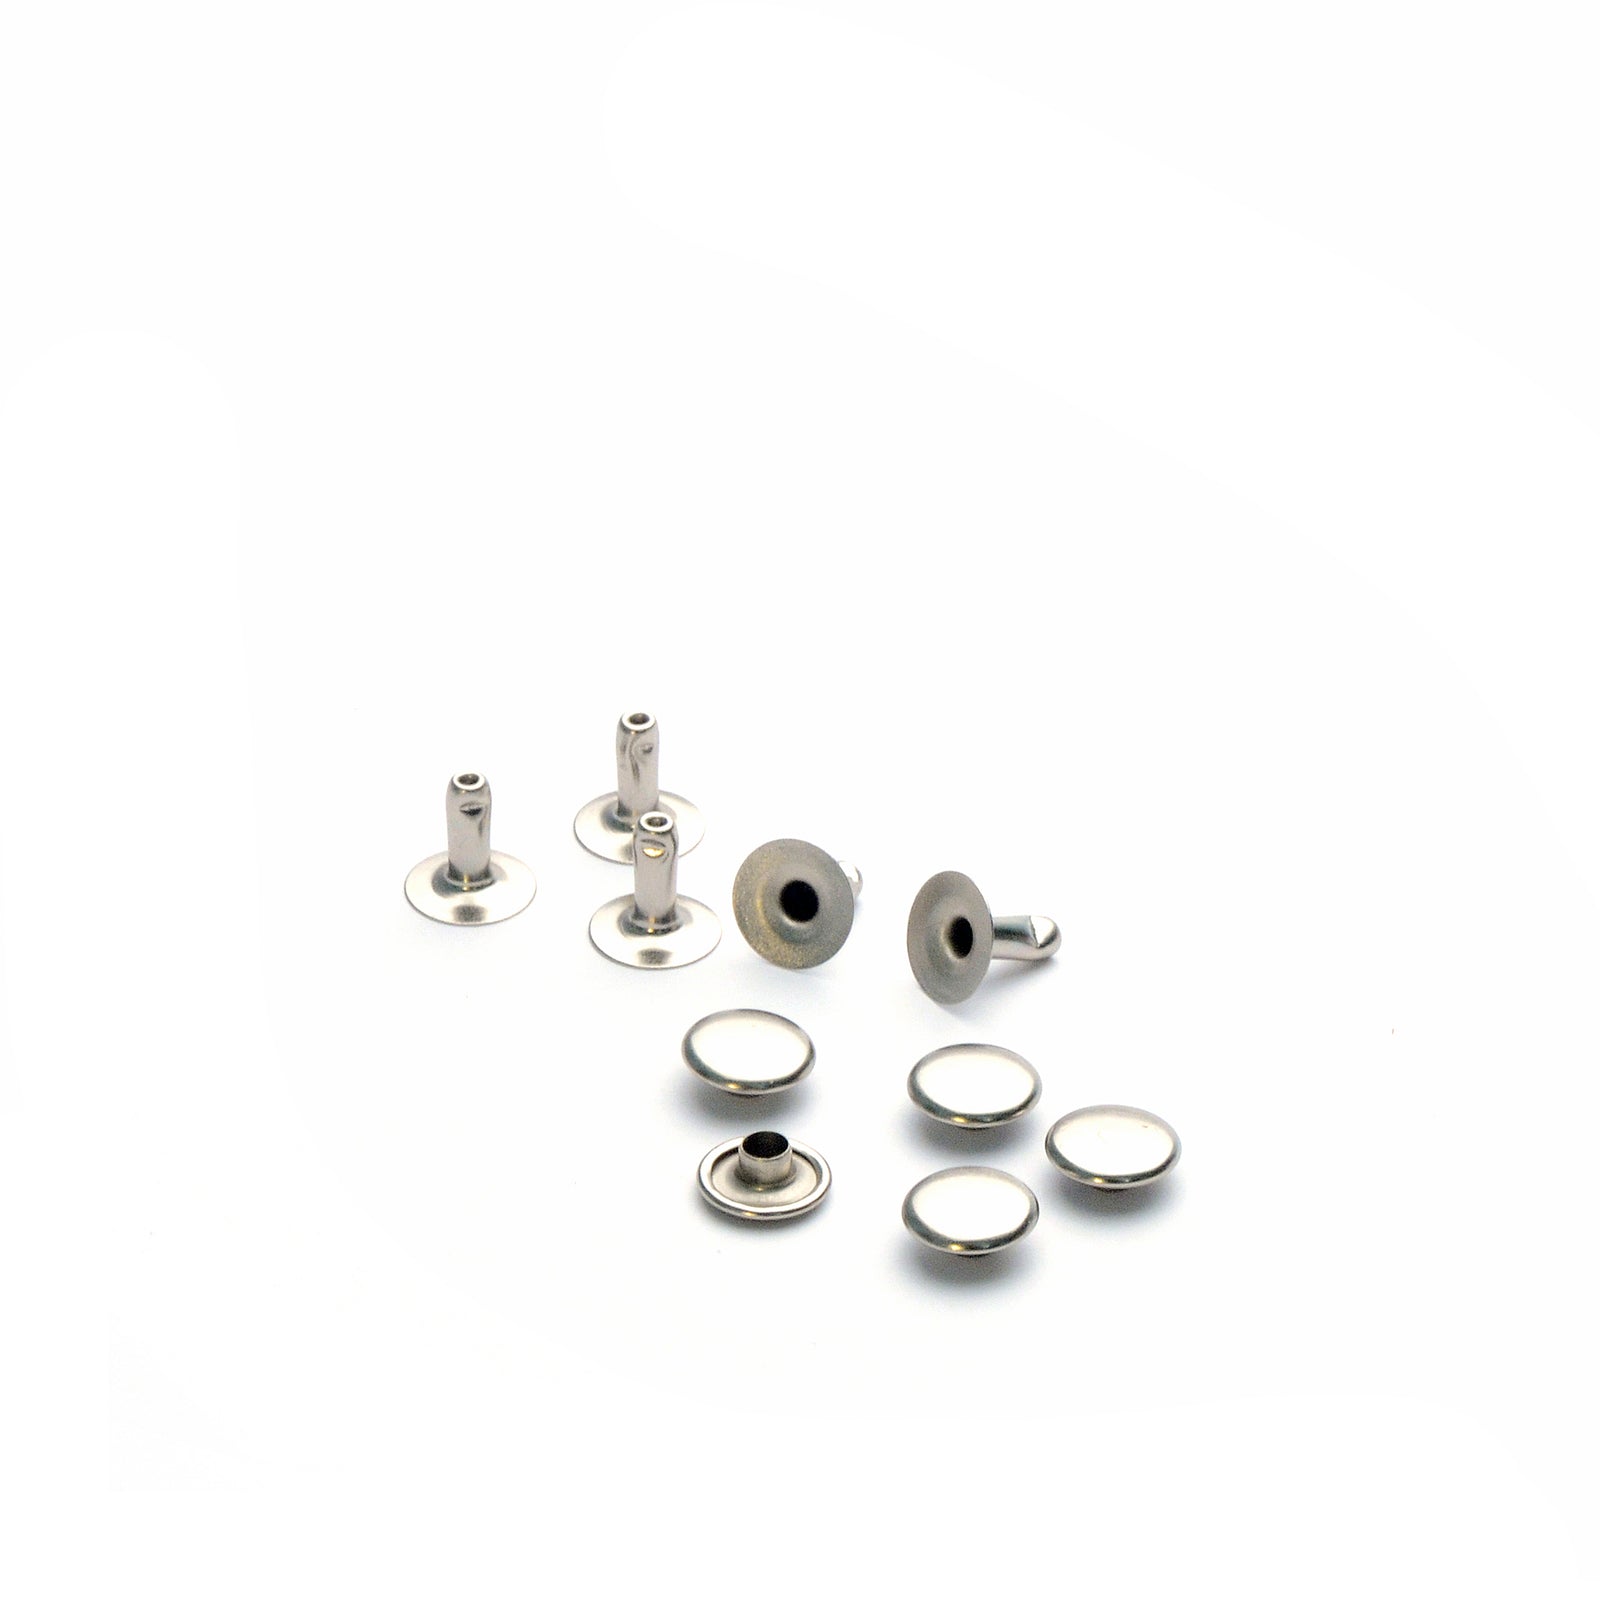 Small Single Cap Rivets Nickel Plated pkg of 100 - Leathersmith Designs Inc.